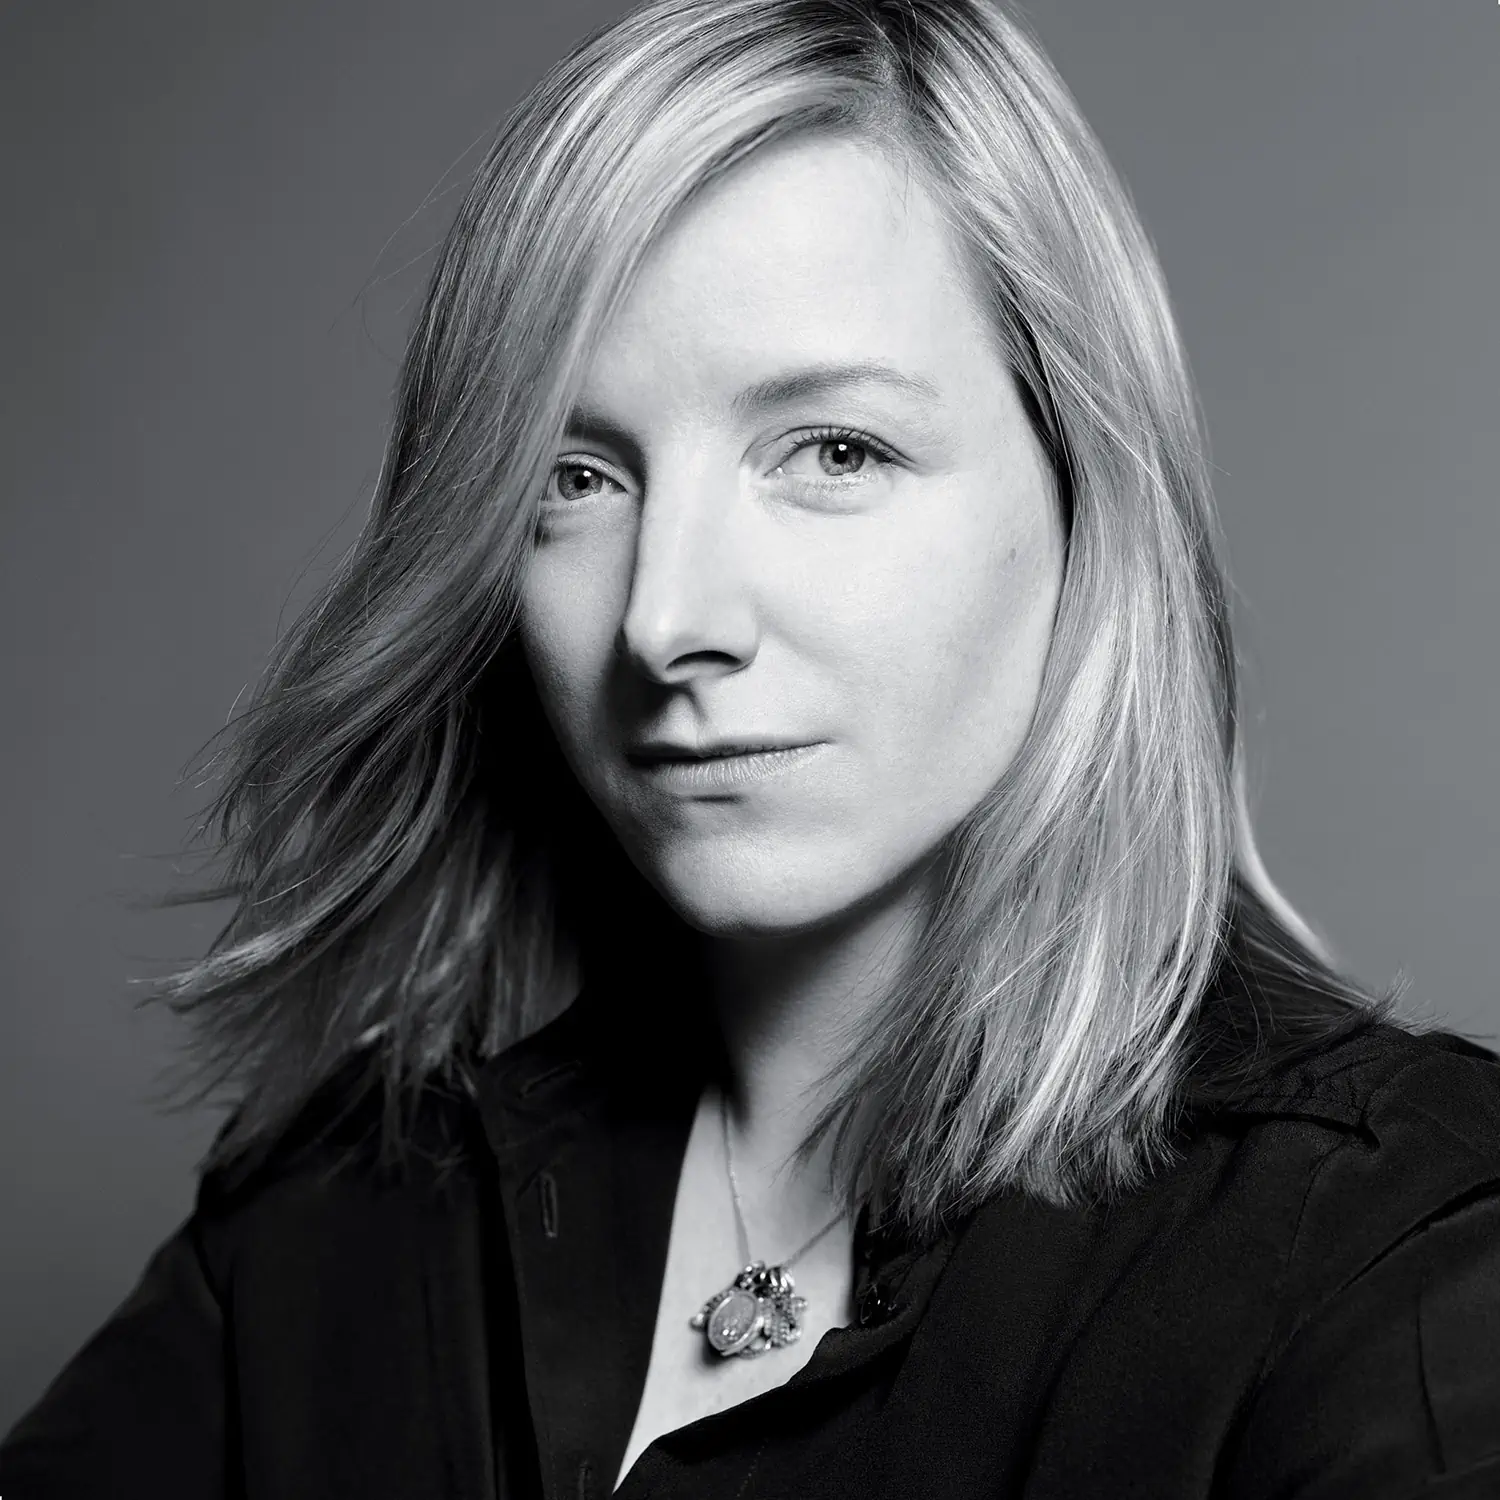 End of an era as Sarah Burton leaves Alexander McQueen after 26 years